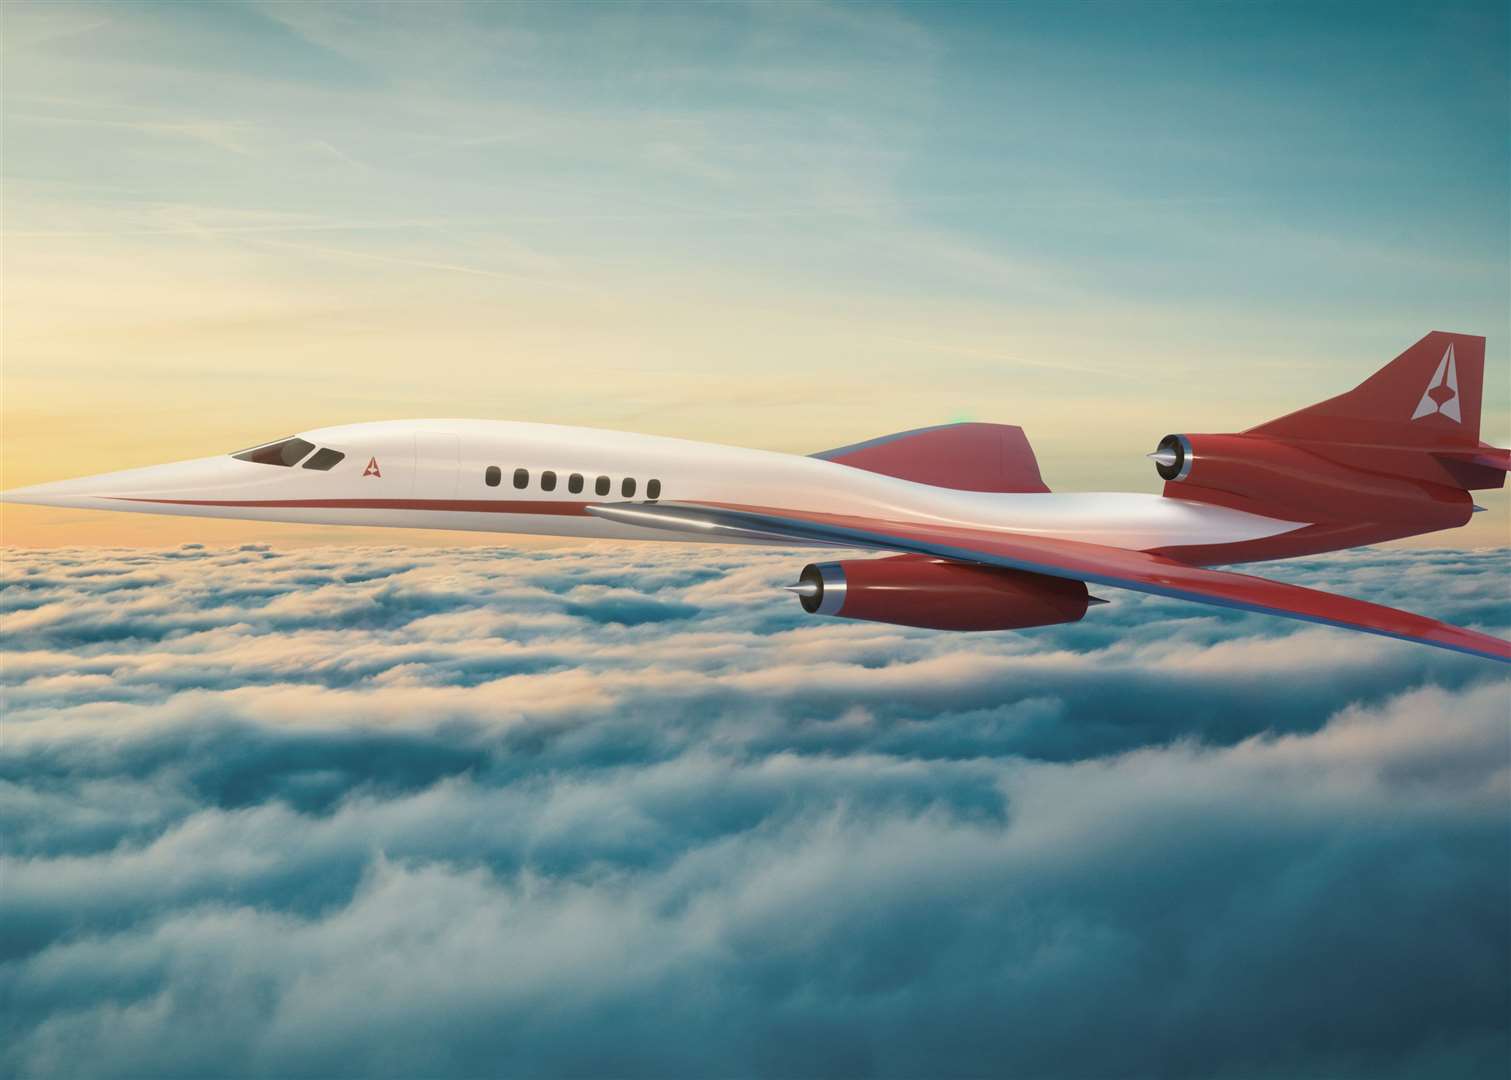 BAE will be working on a private supersonic jet's control system